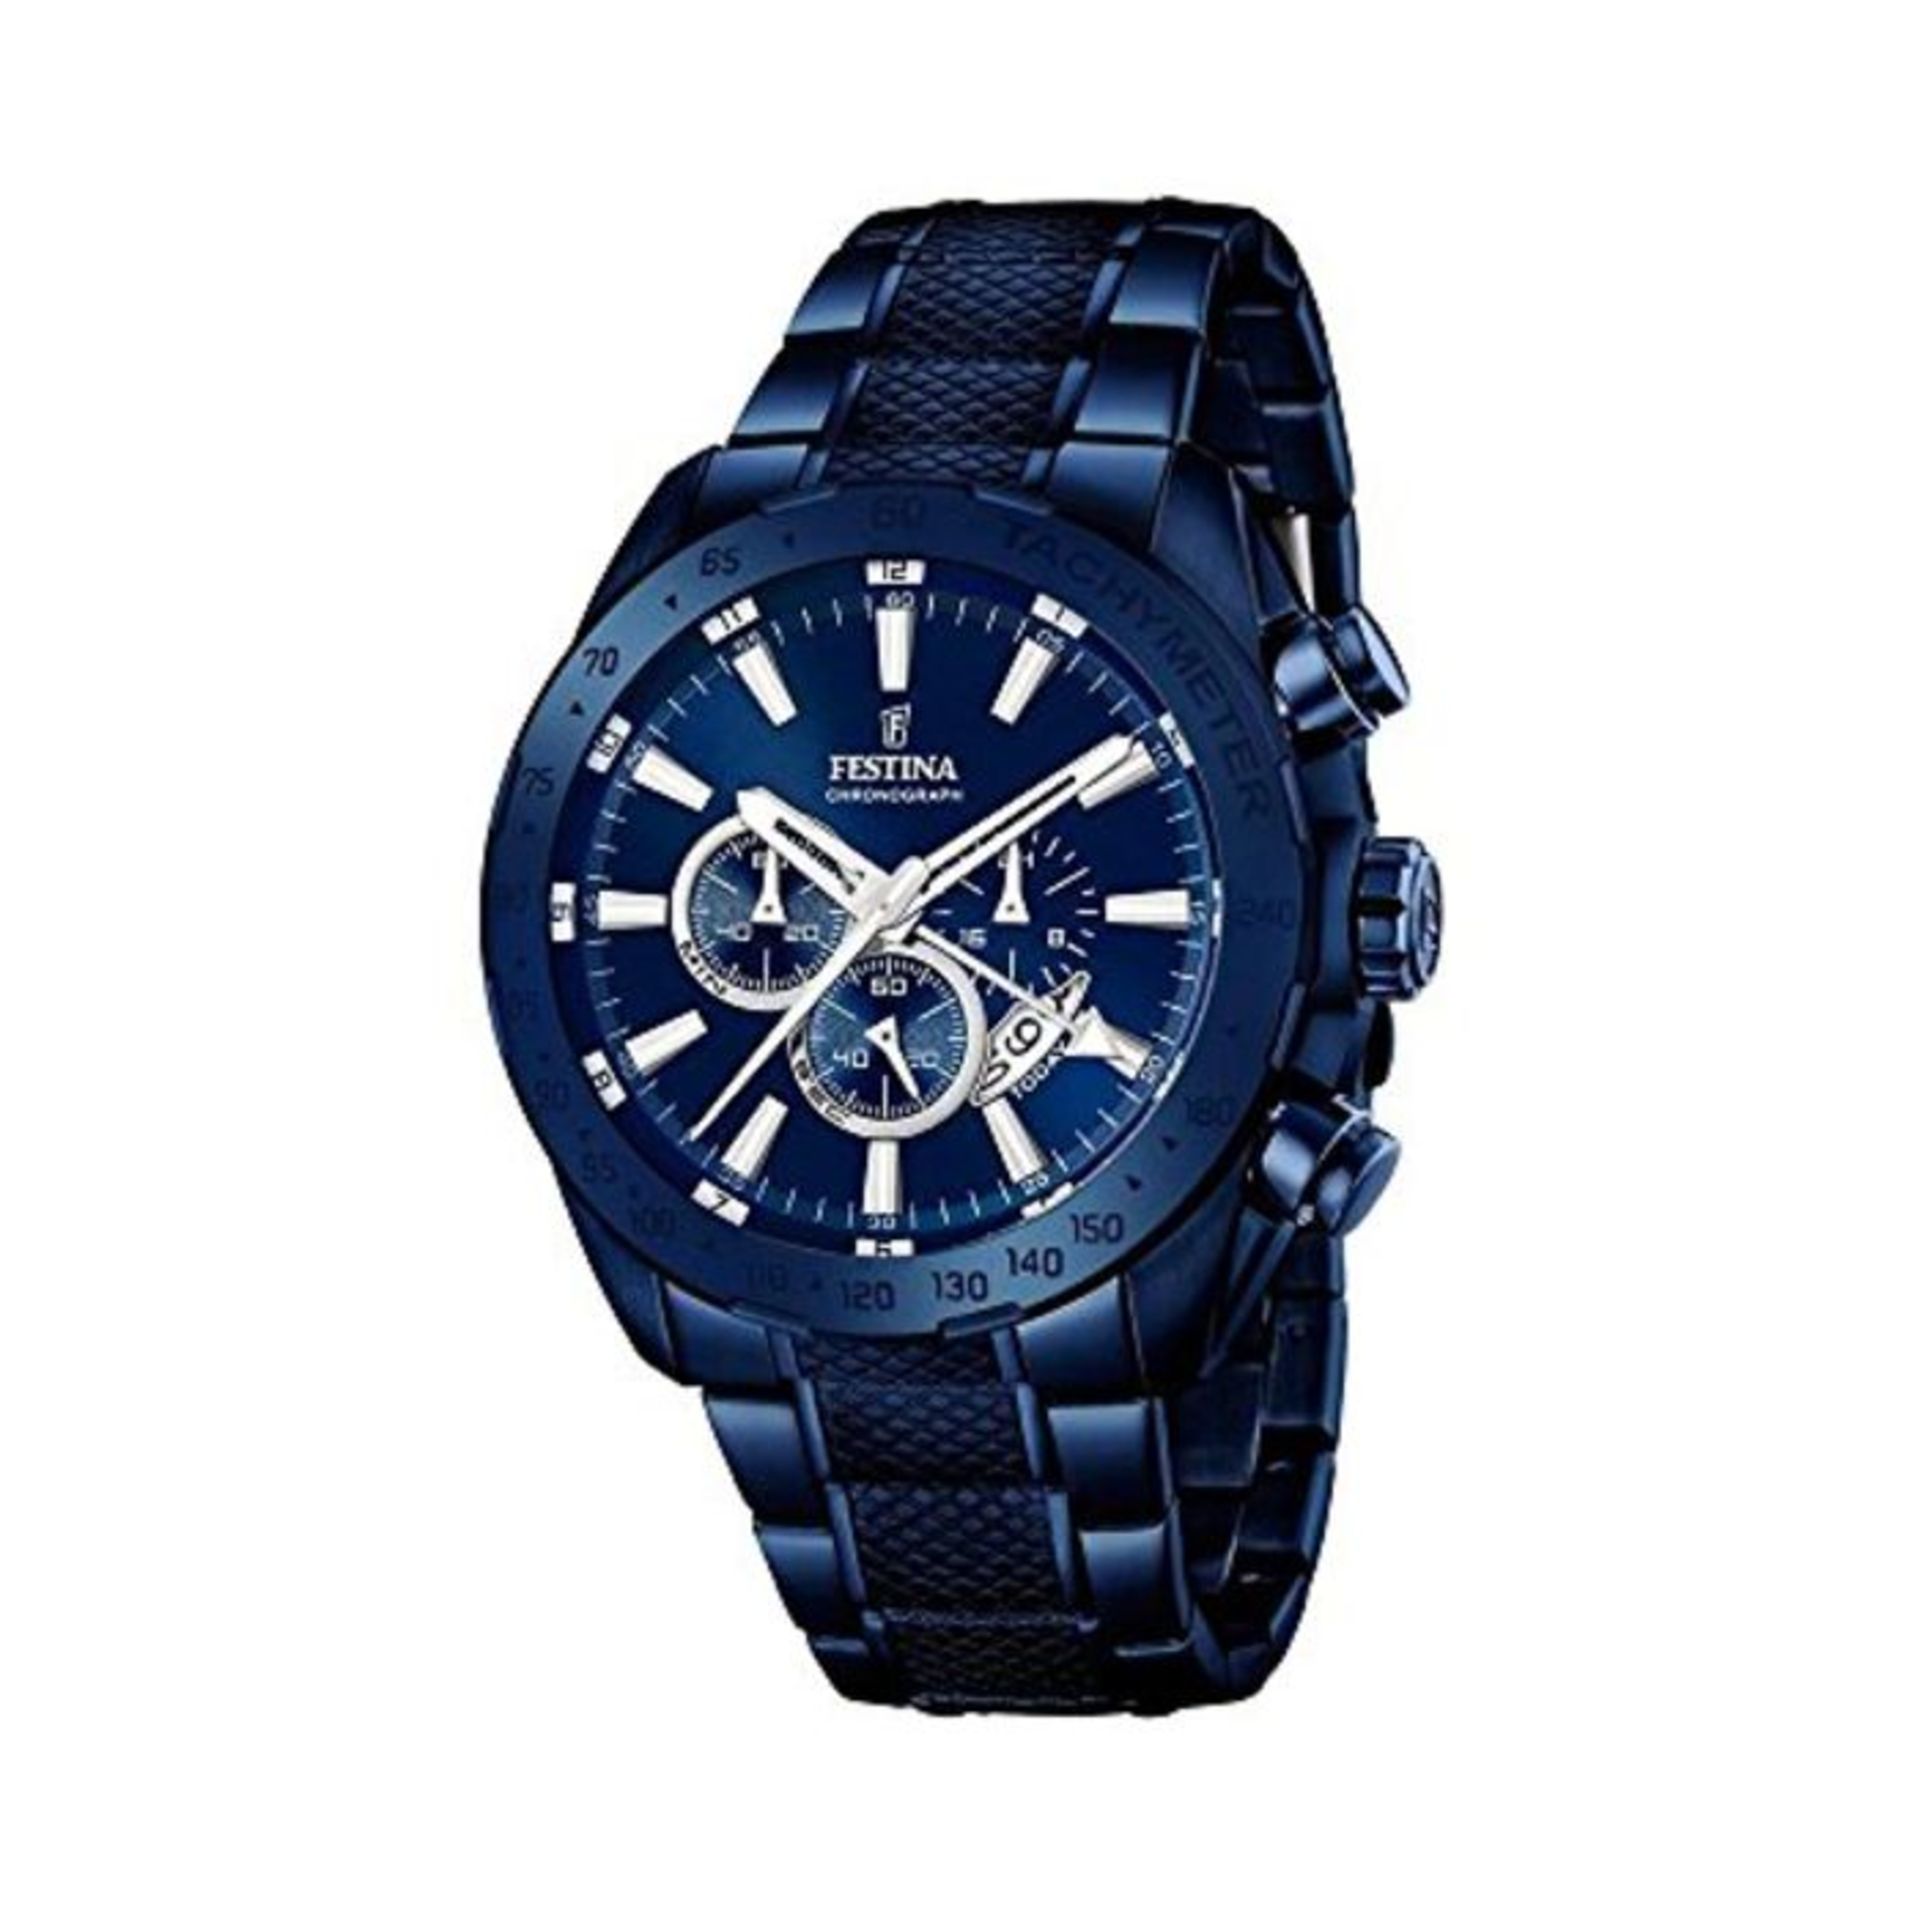 RRP £248.00 Festina Men's Quartz Watch with Blue Dial Chronograph Display and Blue Stainless Steel